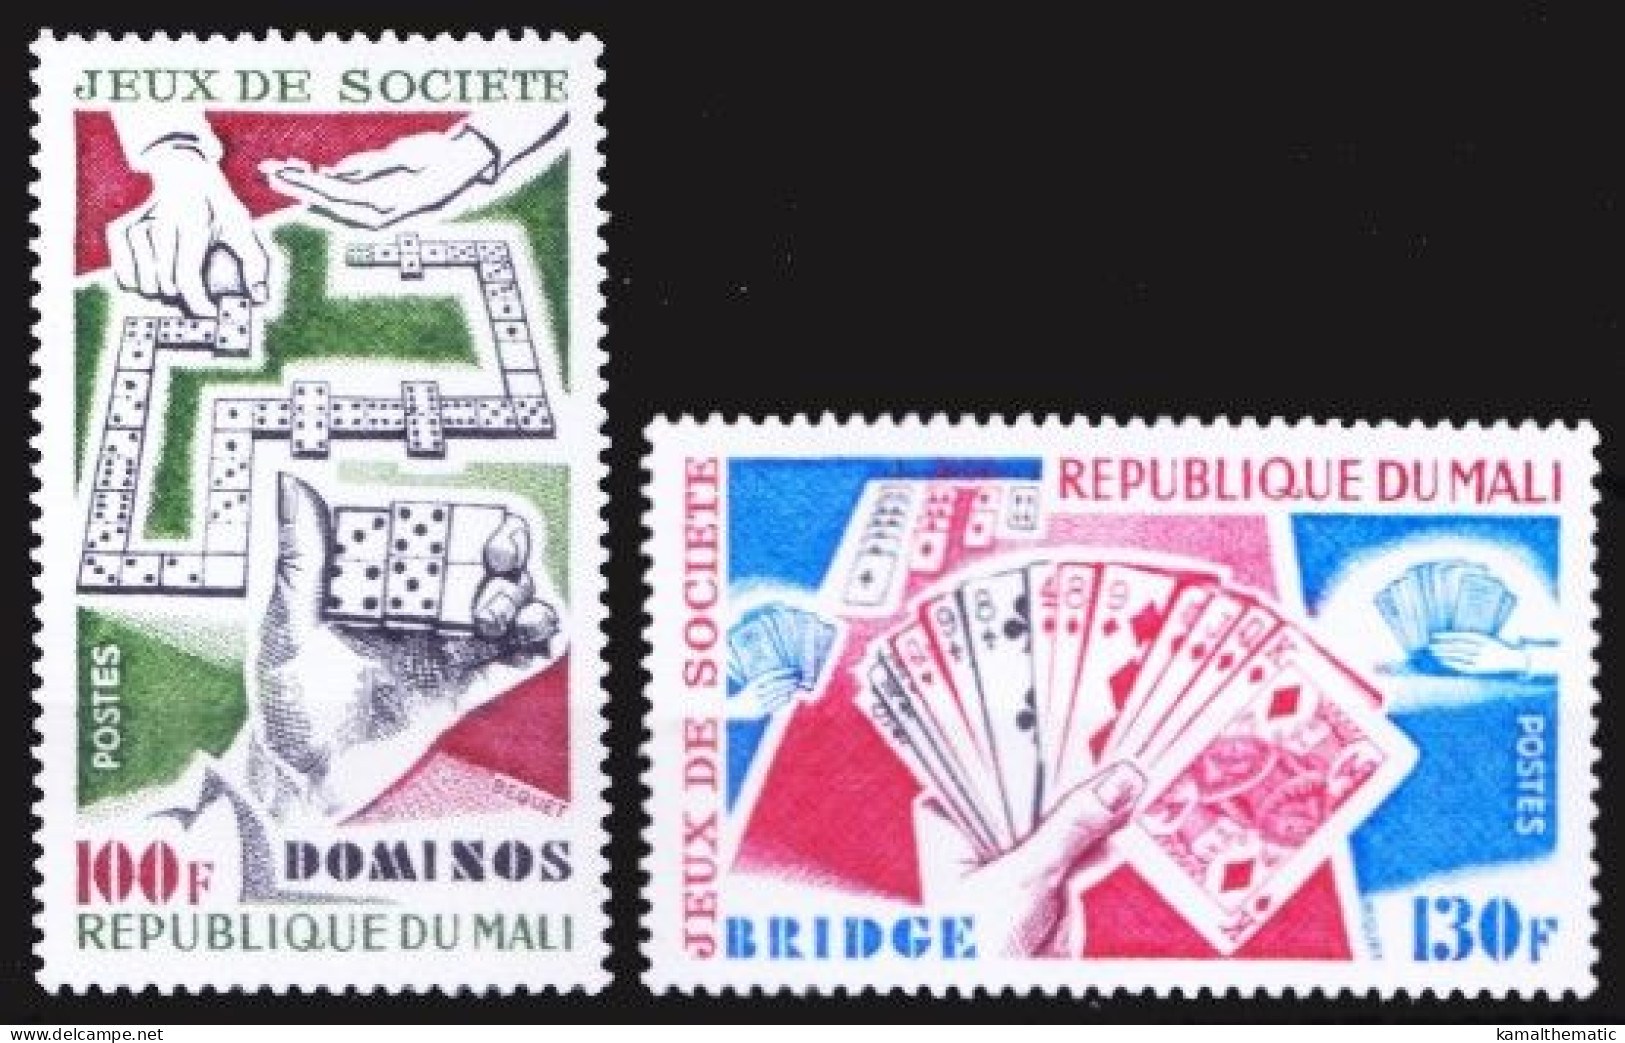 Mali 1978 MNH 2v, Social Games Playing Cards, Bridge Dominos - Unclassified